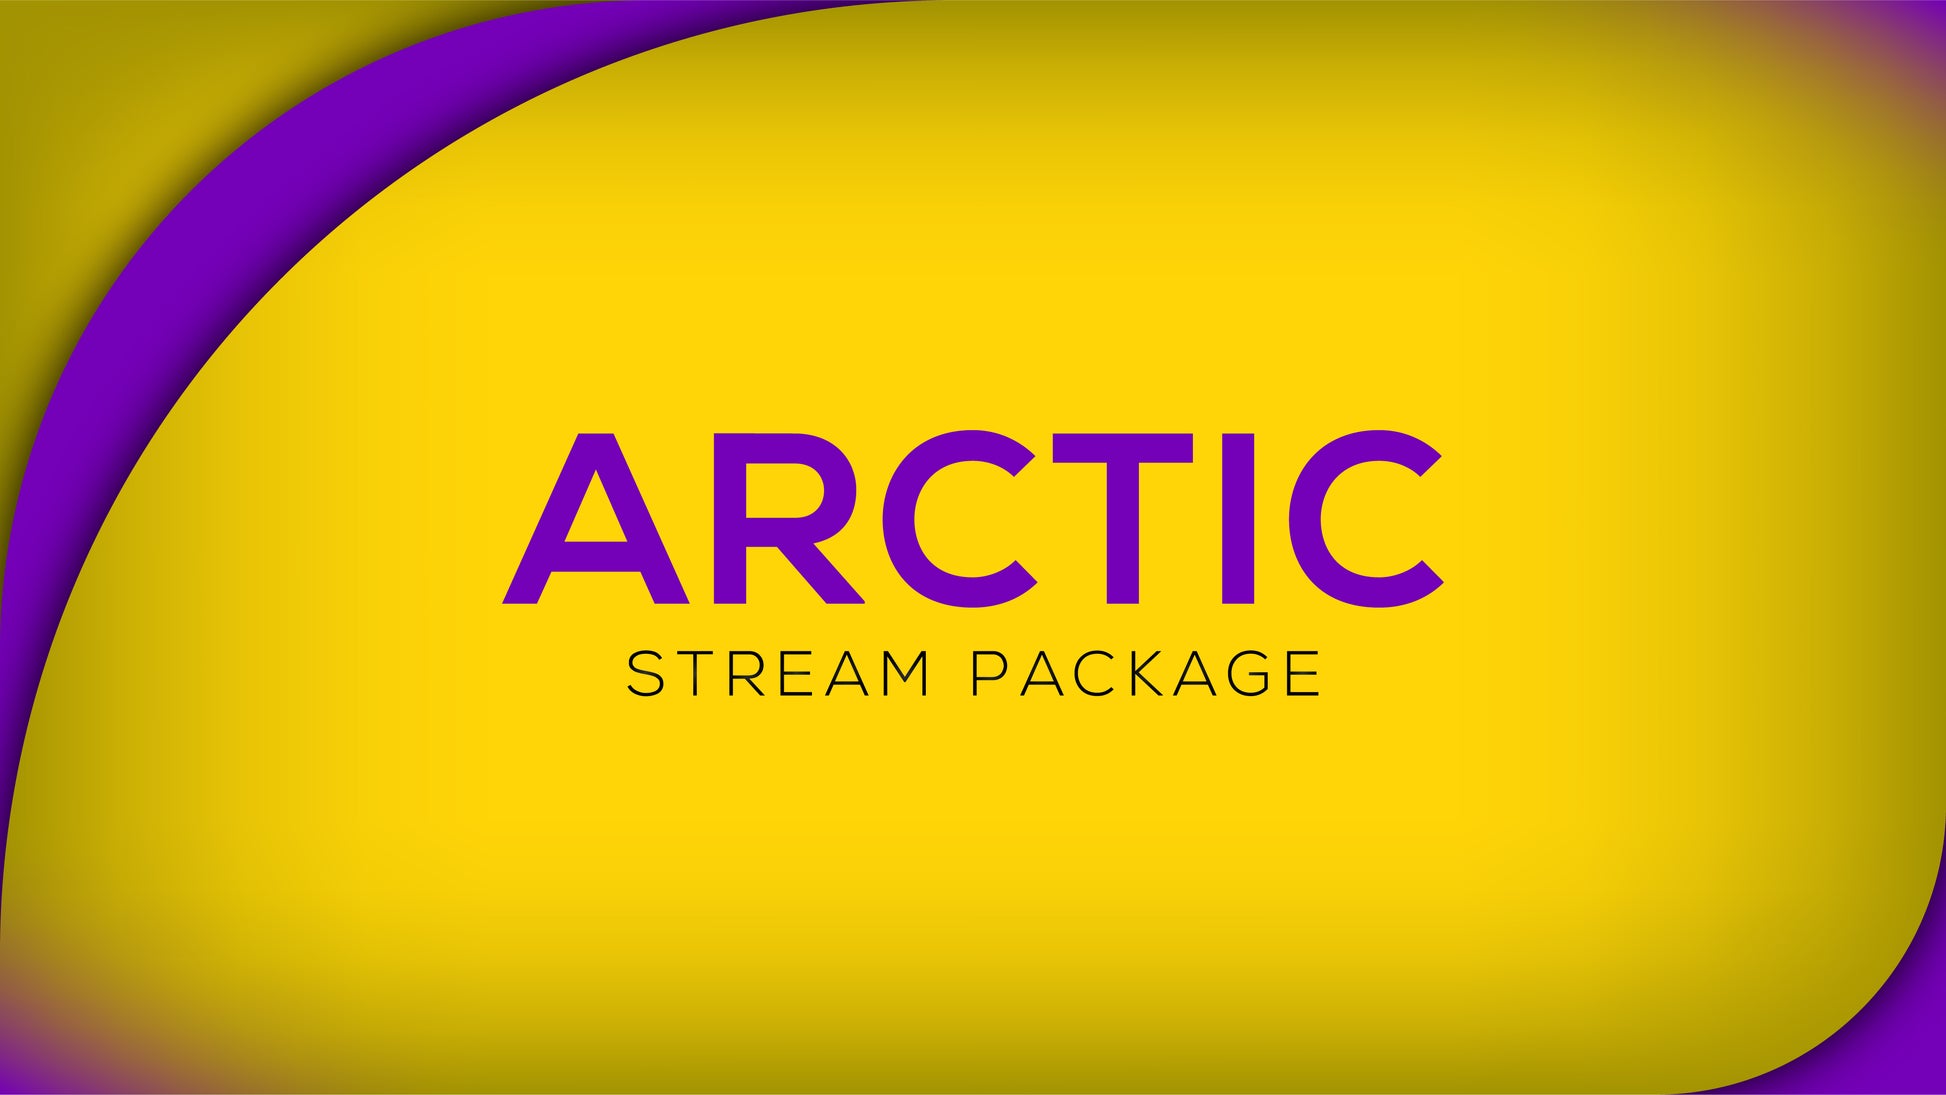 Stream Overlay Package Arctic Purple and Gold Stream Designz